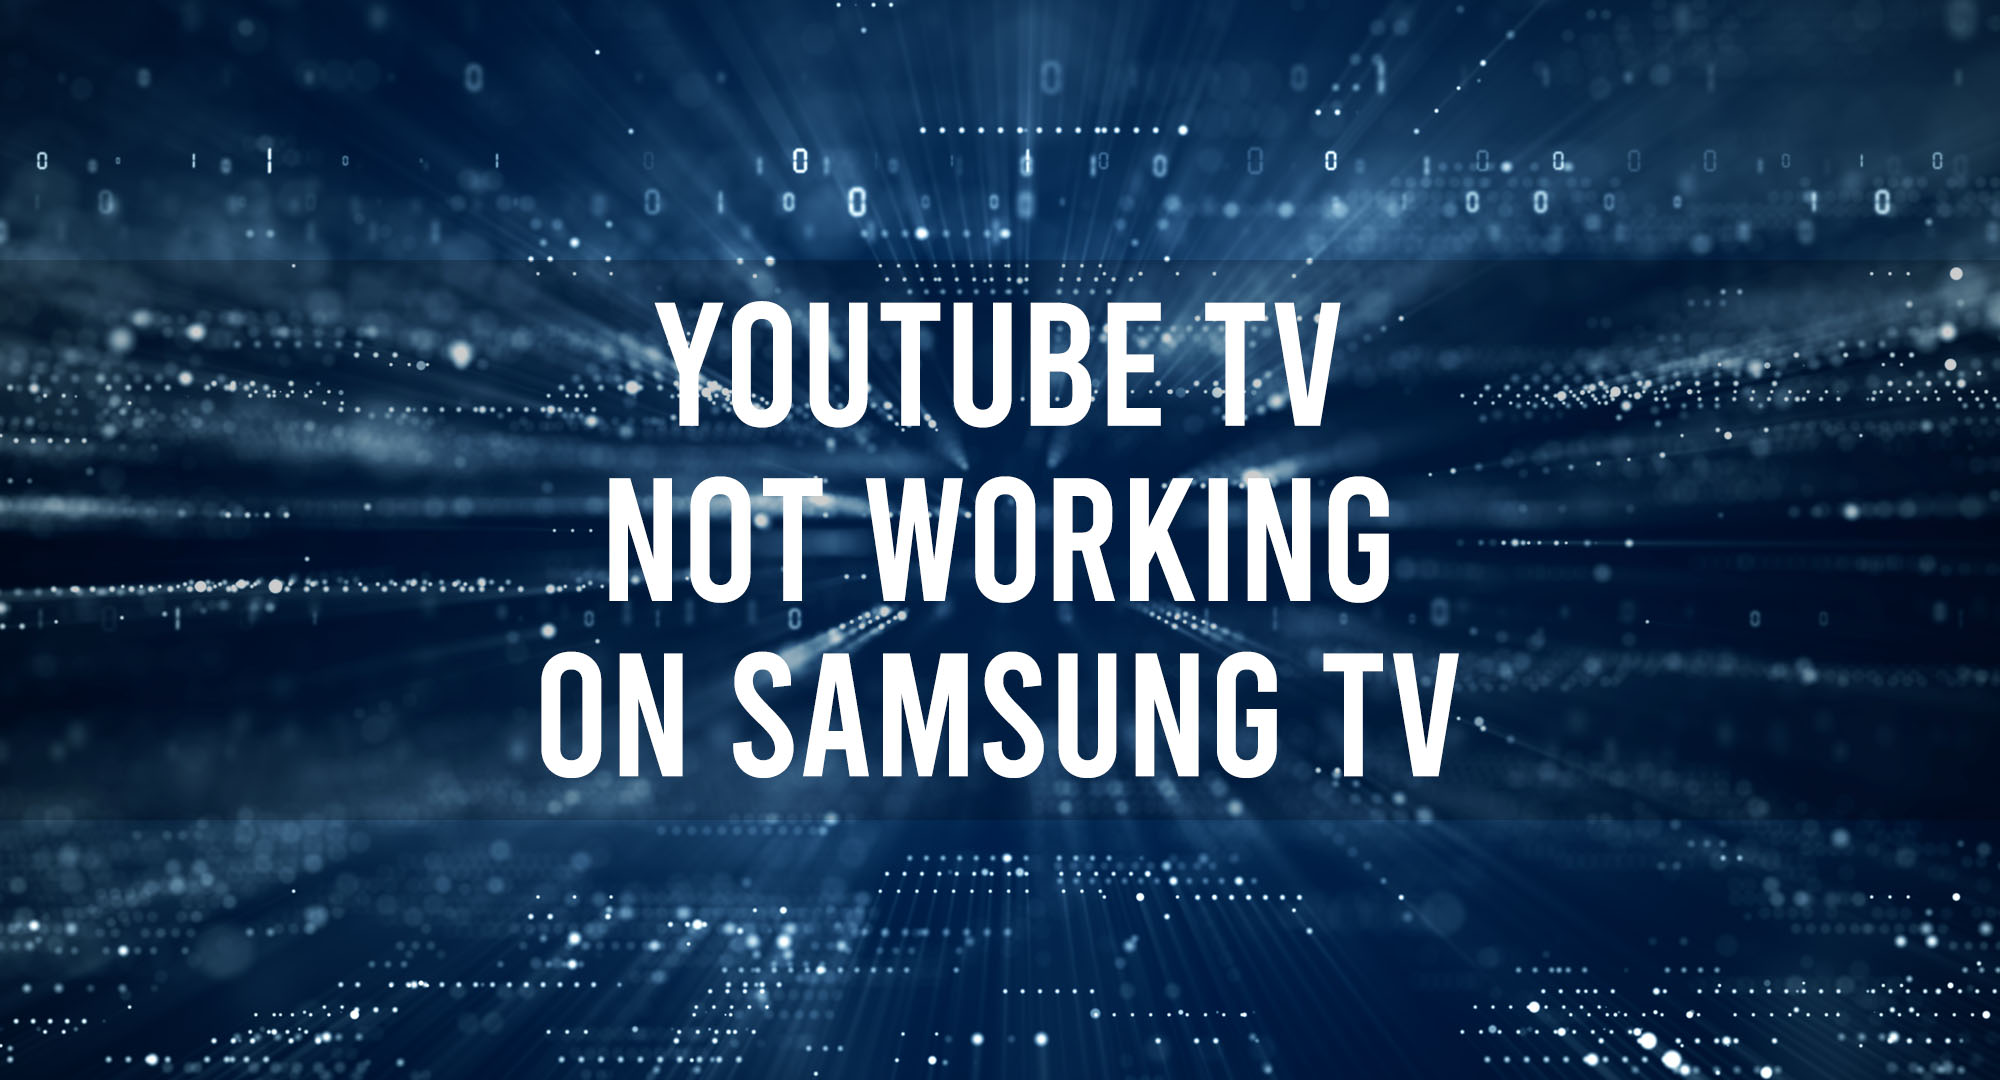 Youtube TV Not Working On Samsung TV